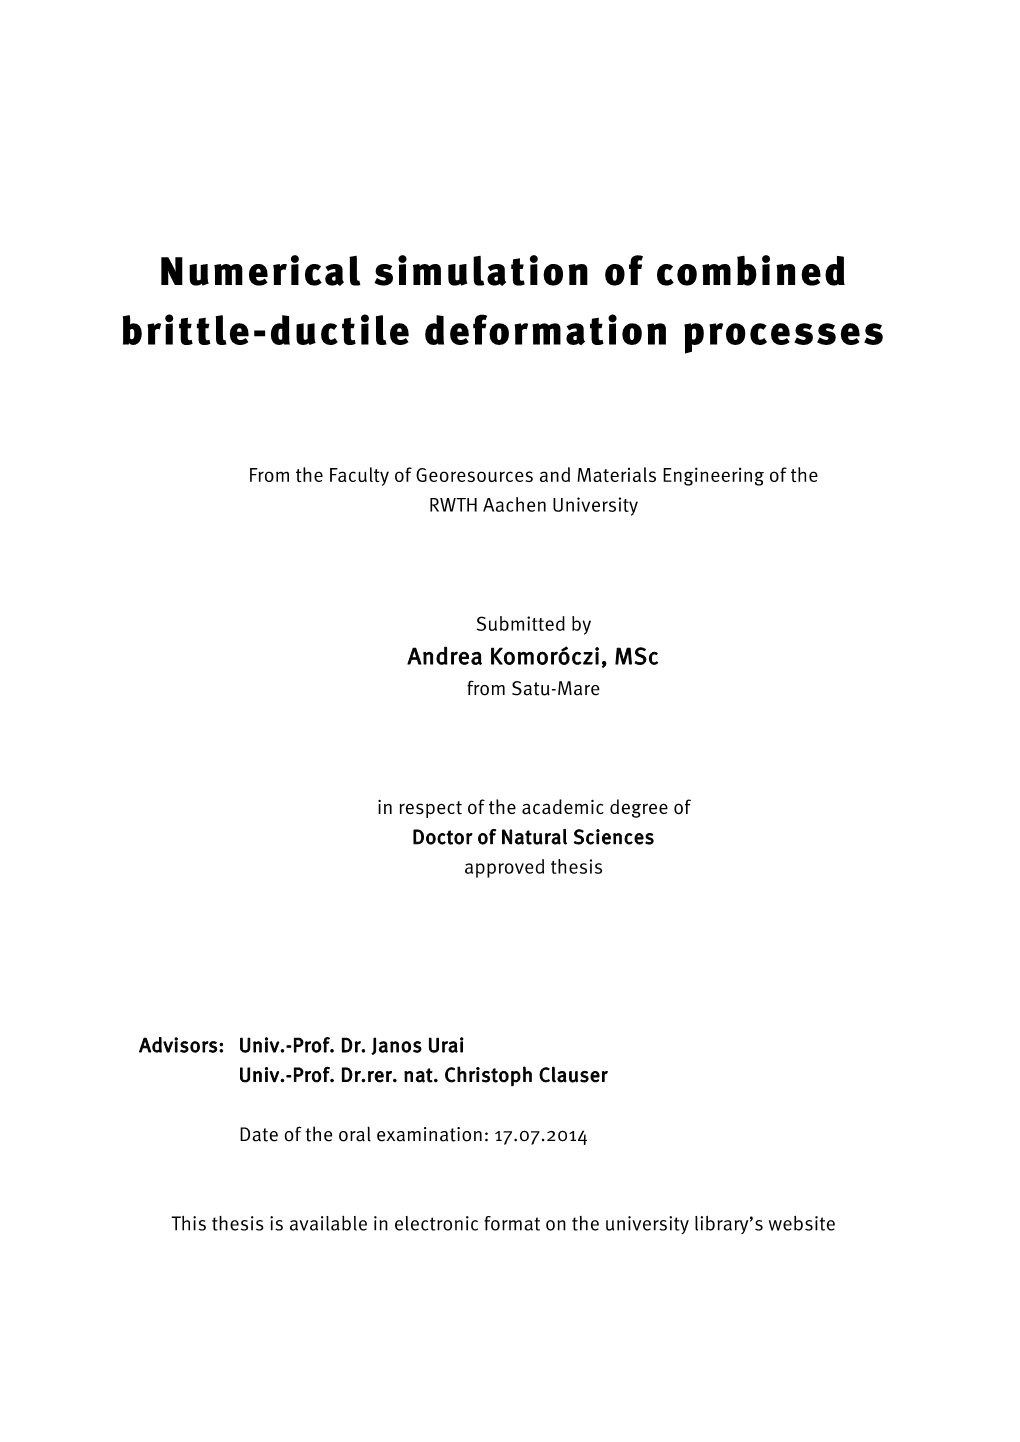 Numerical Simulation of Combined Brittle-Ductile Deformation Processes